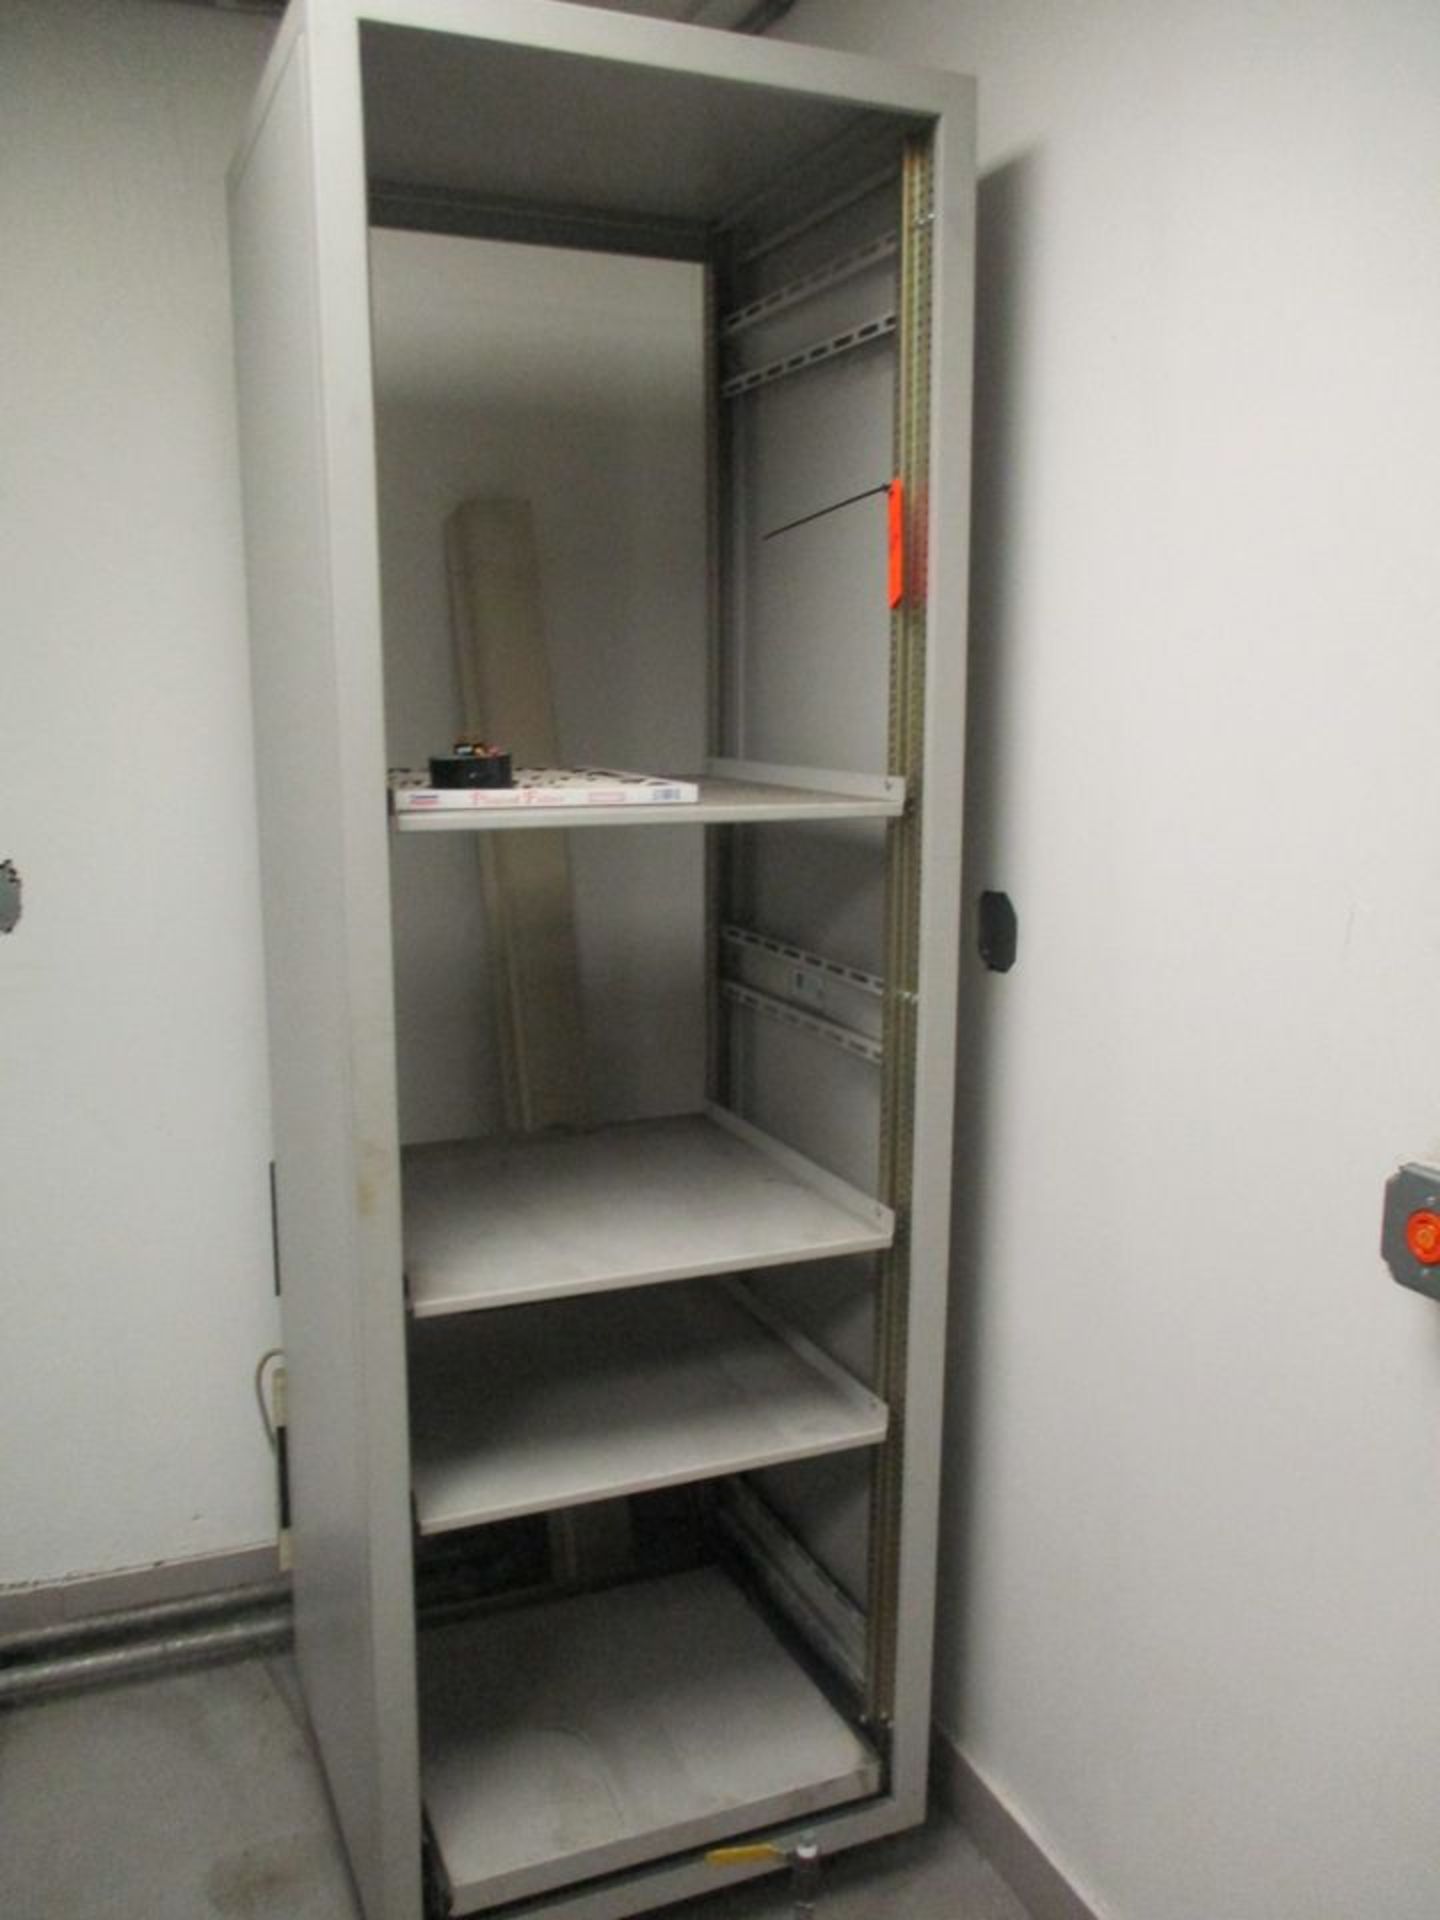 6' Test Bench and Computer Cabinet (Building 9 Area 4) - Image 2 of 2